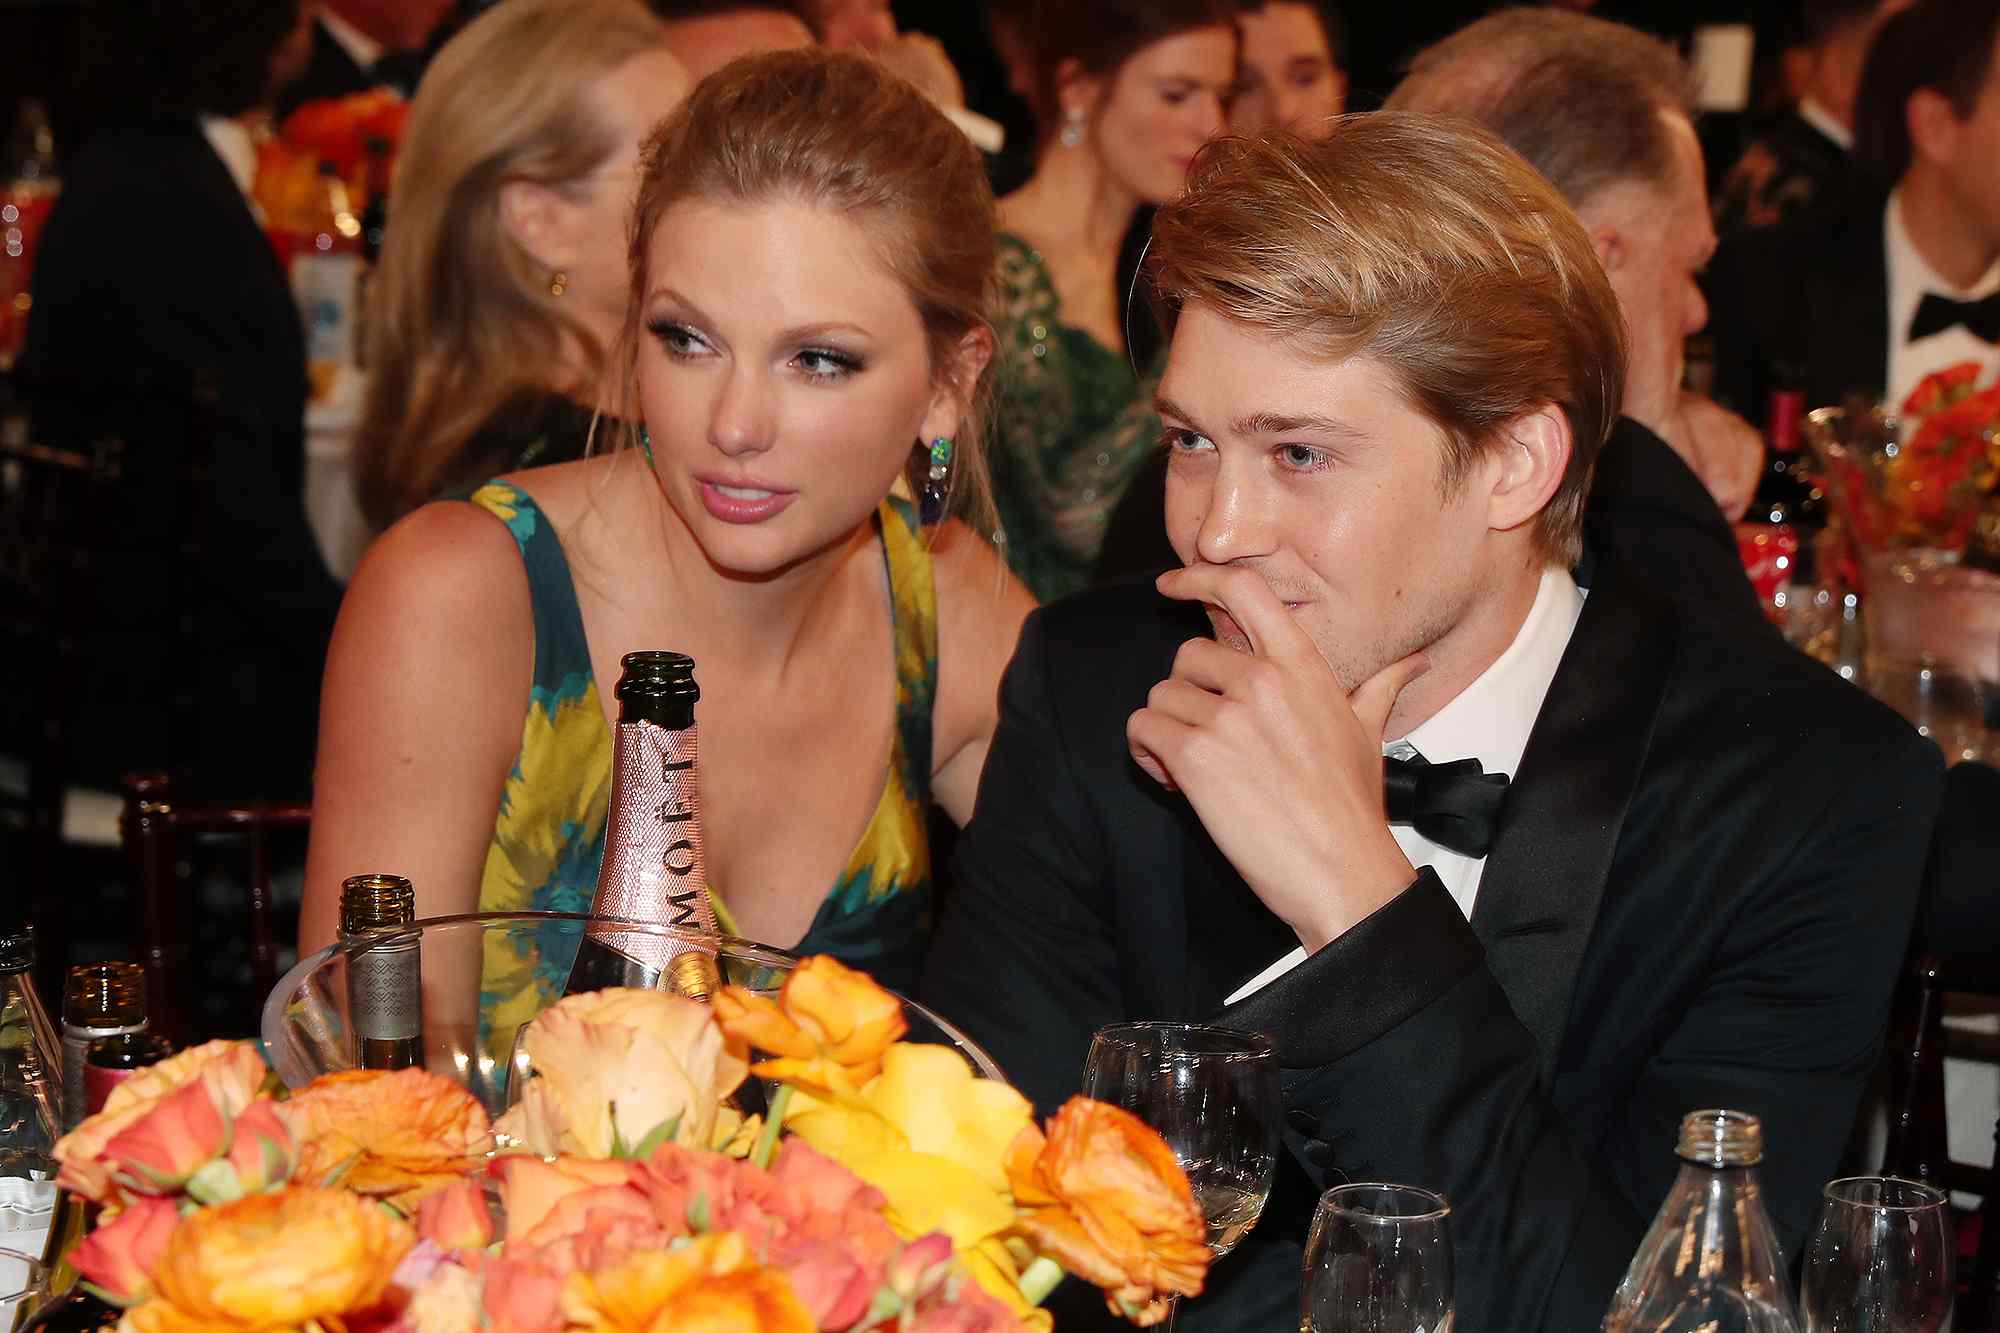 Joe Alwyn Emphasizes That He and Taylor Swift Decided ‘Together’ to Keep Their Relationship Private